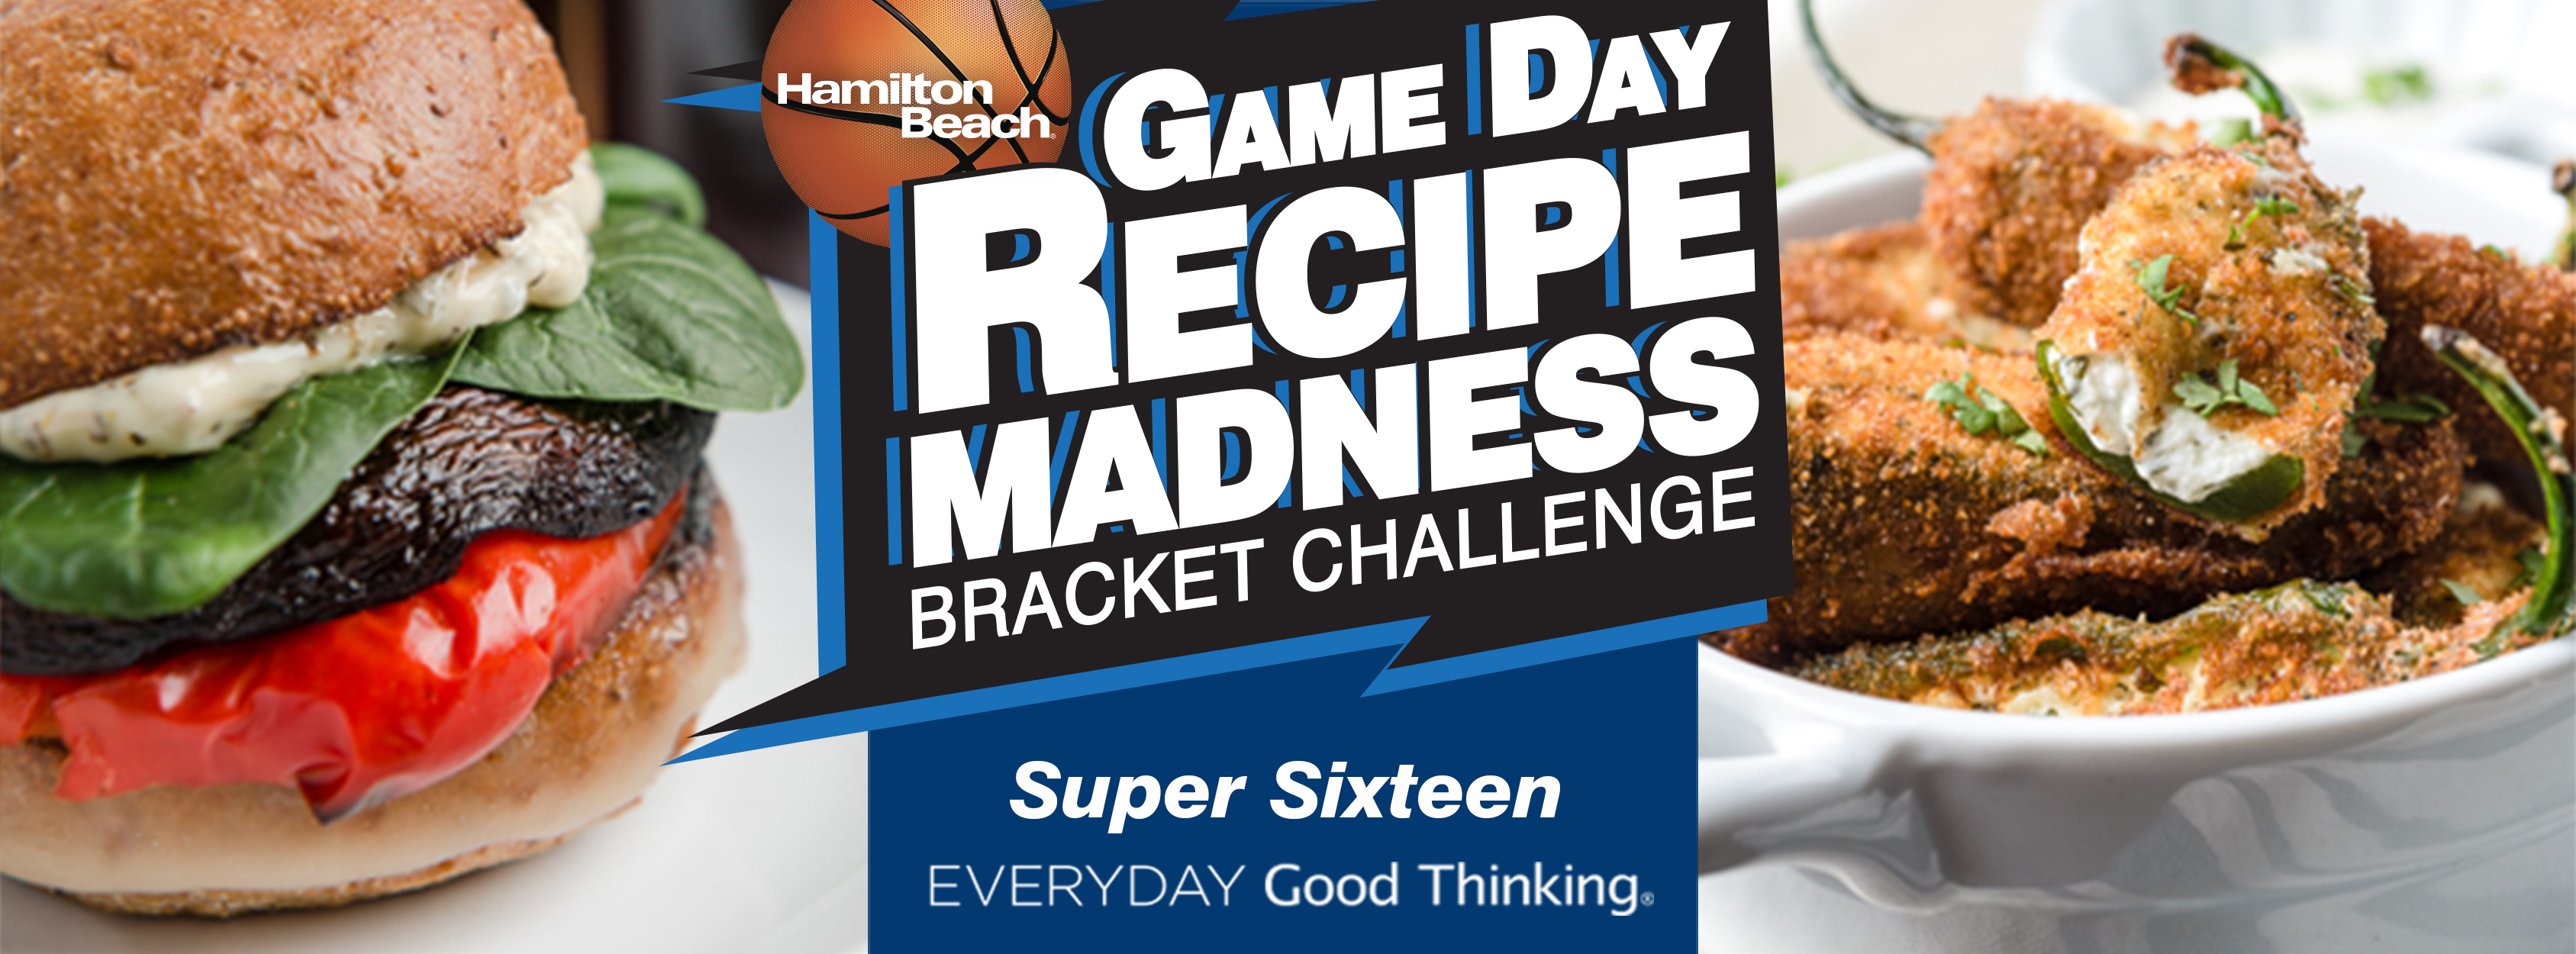 Play the Hamilton Beach Game Day Recipe Madness Bracket Challenge and vote for your favorite game day recipes. What recipes will make it to the championship round? #HBmadness